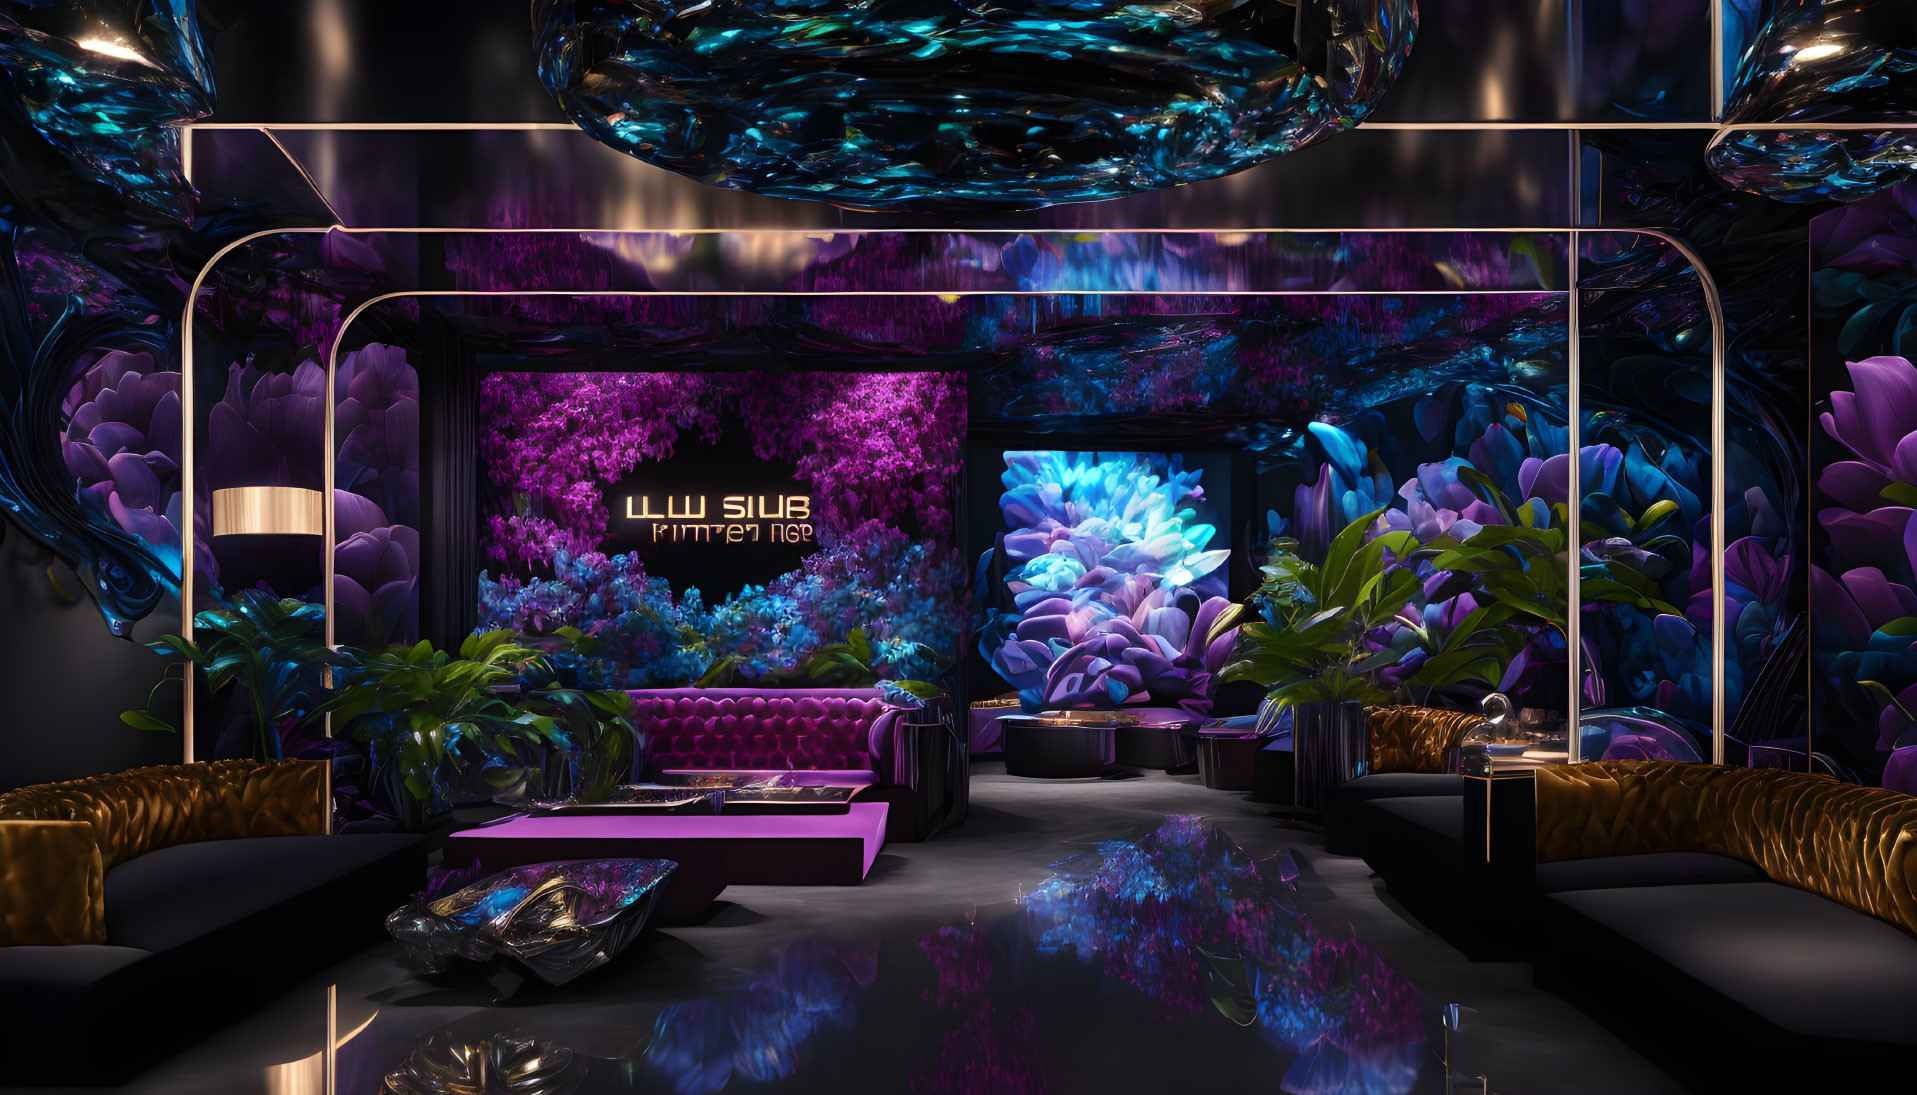 Modern lounge with LED-lit flora, reflective surfaces, and futuristic design elements.